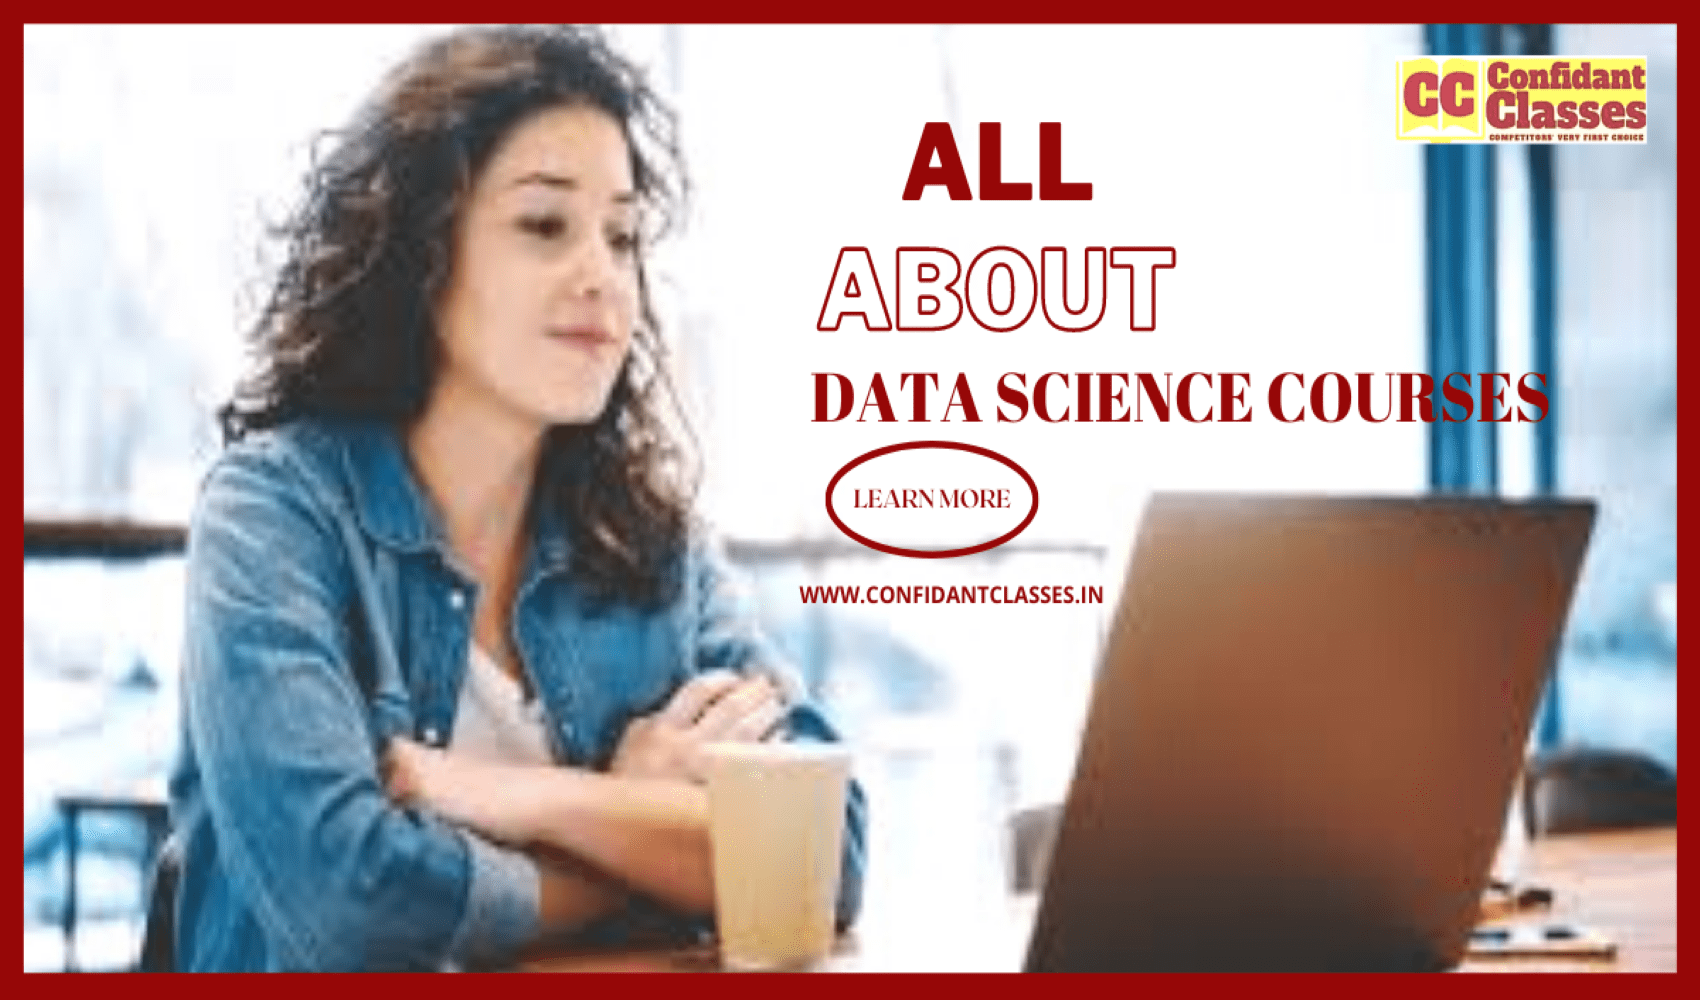 All About Data Science Courses